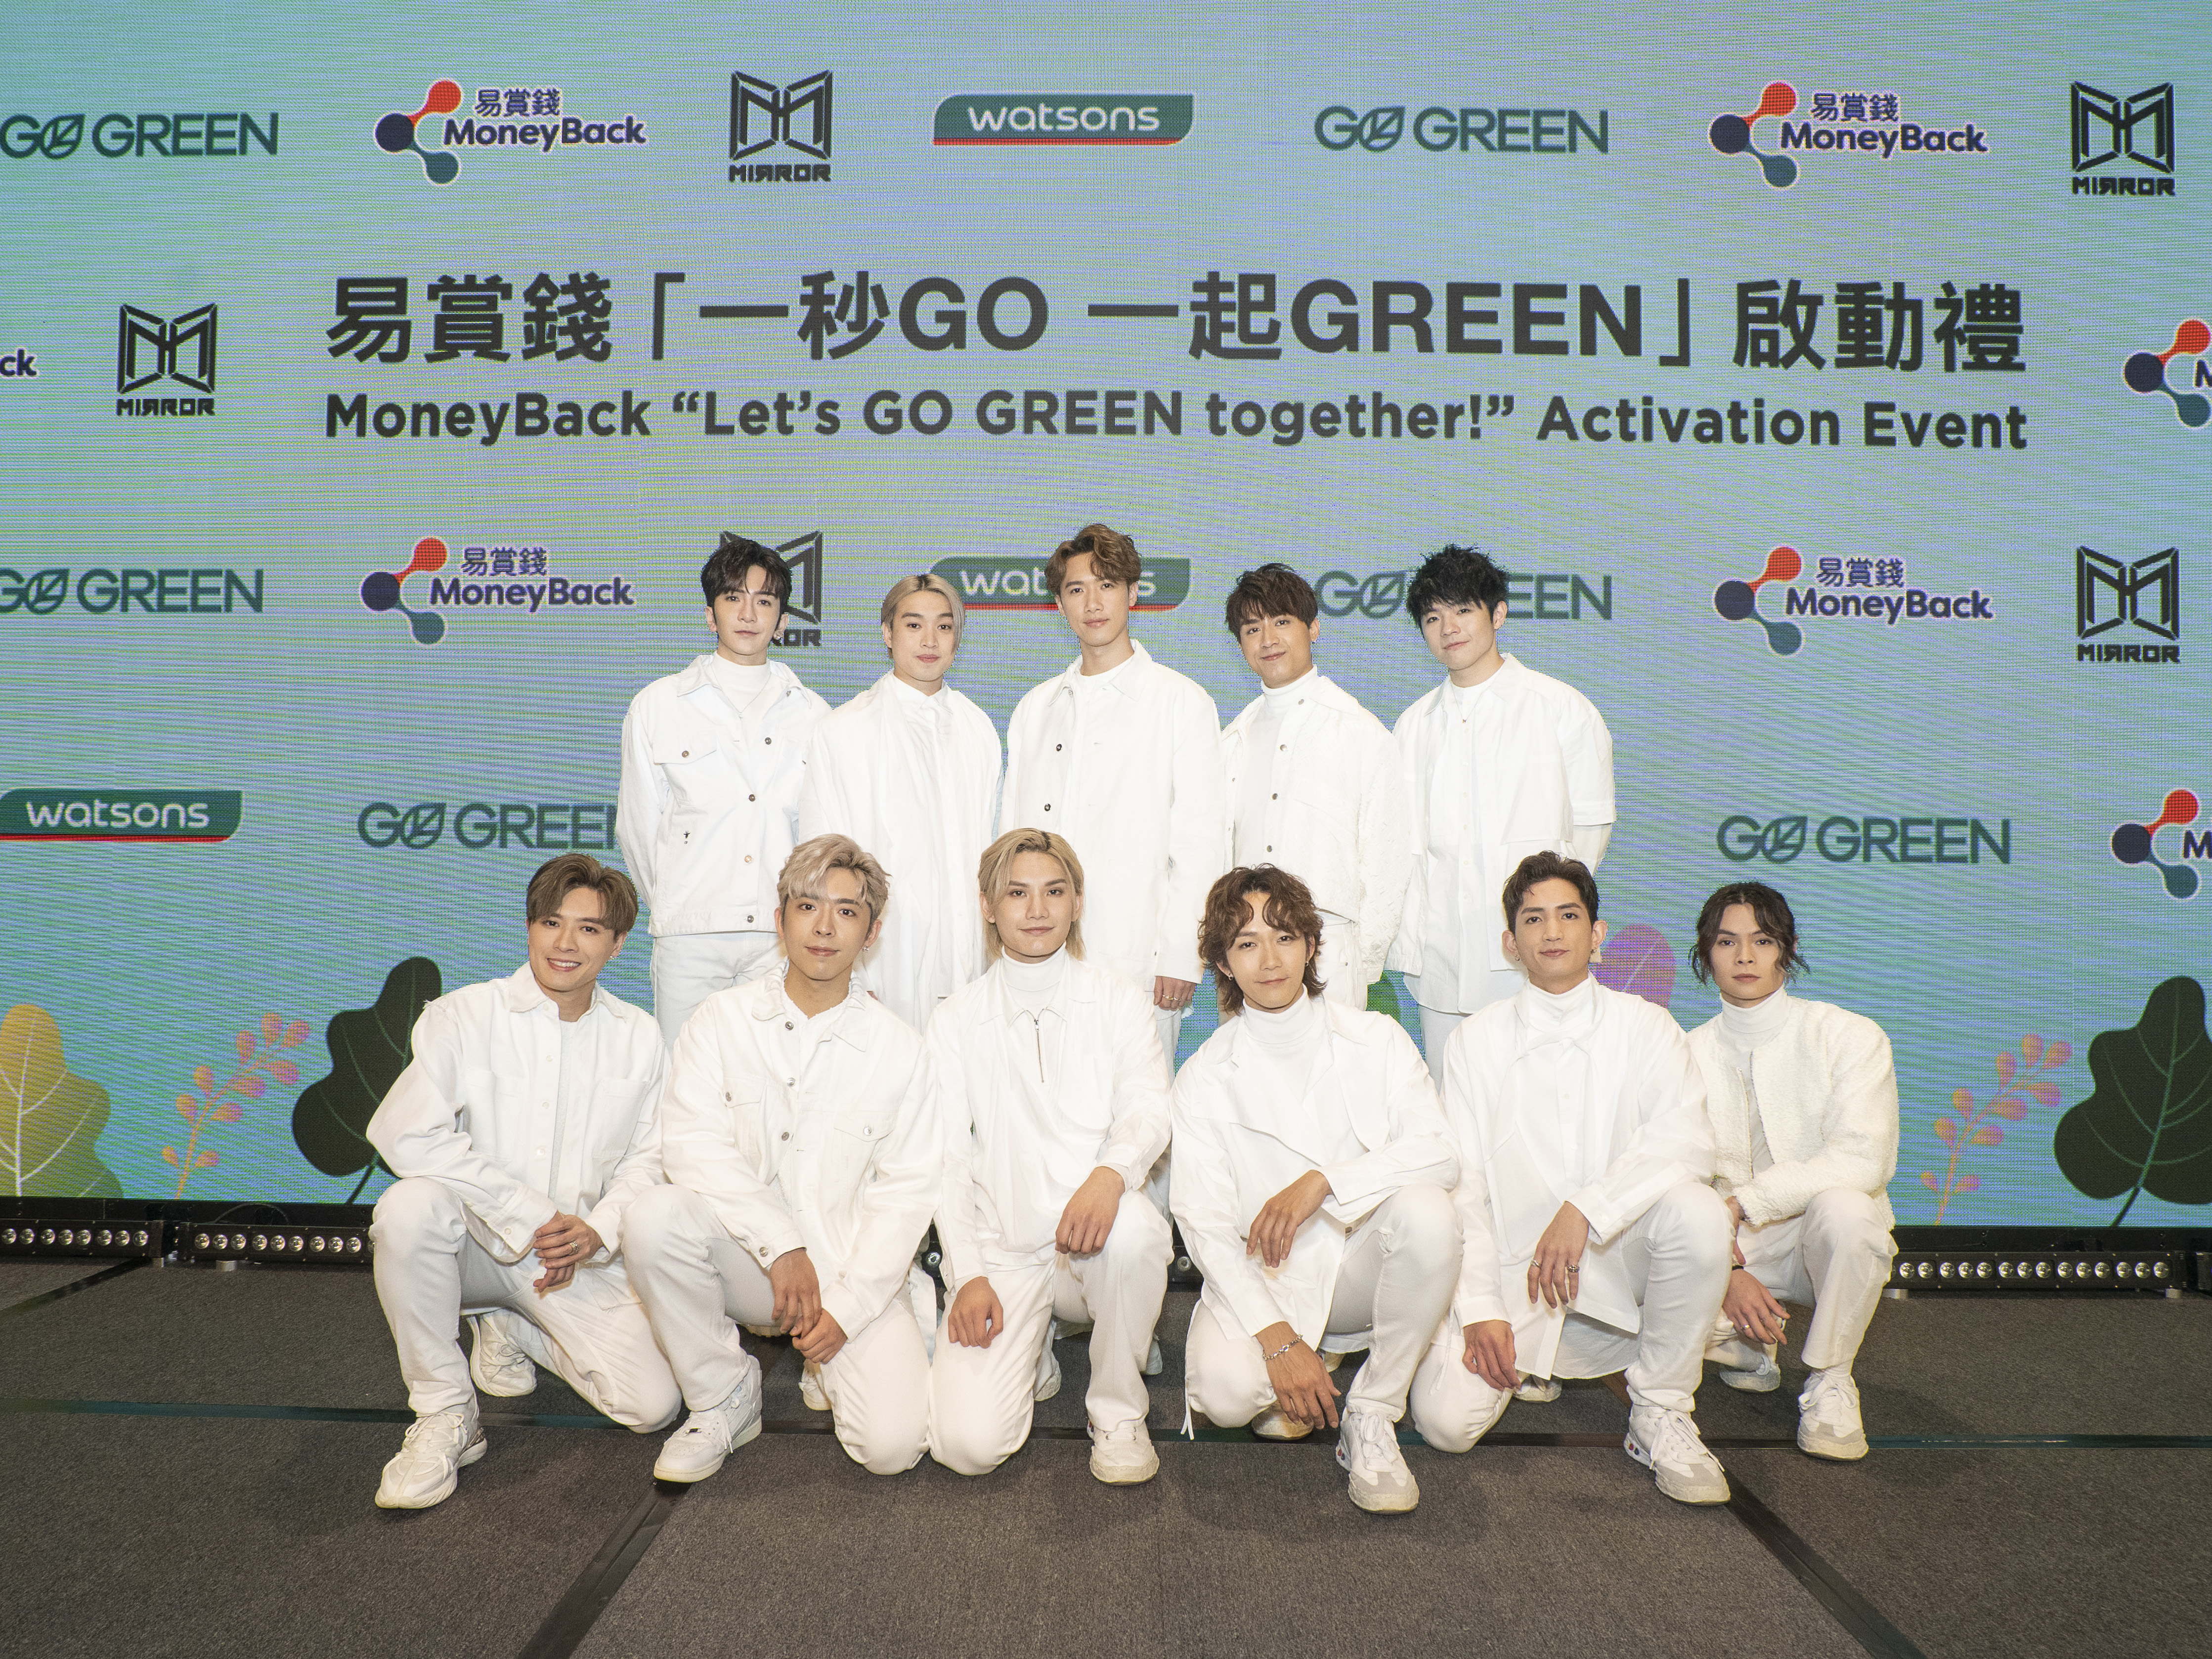 Super boy band MIRROR is named as the ambassador of Watsons' GO GREEN sustainability campaign, to lead the public to pursue a more sustainable lifestyle.